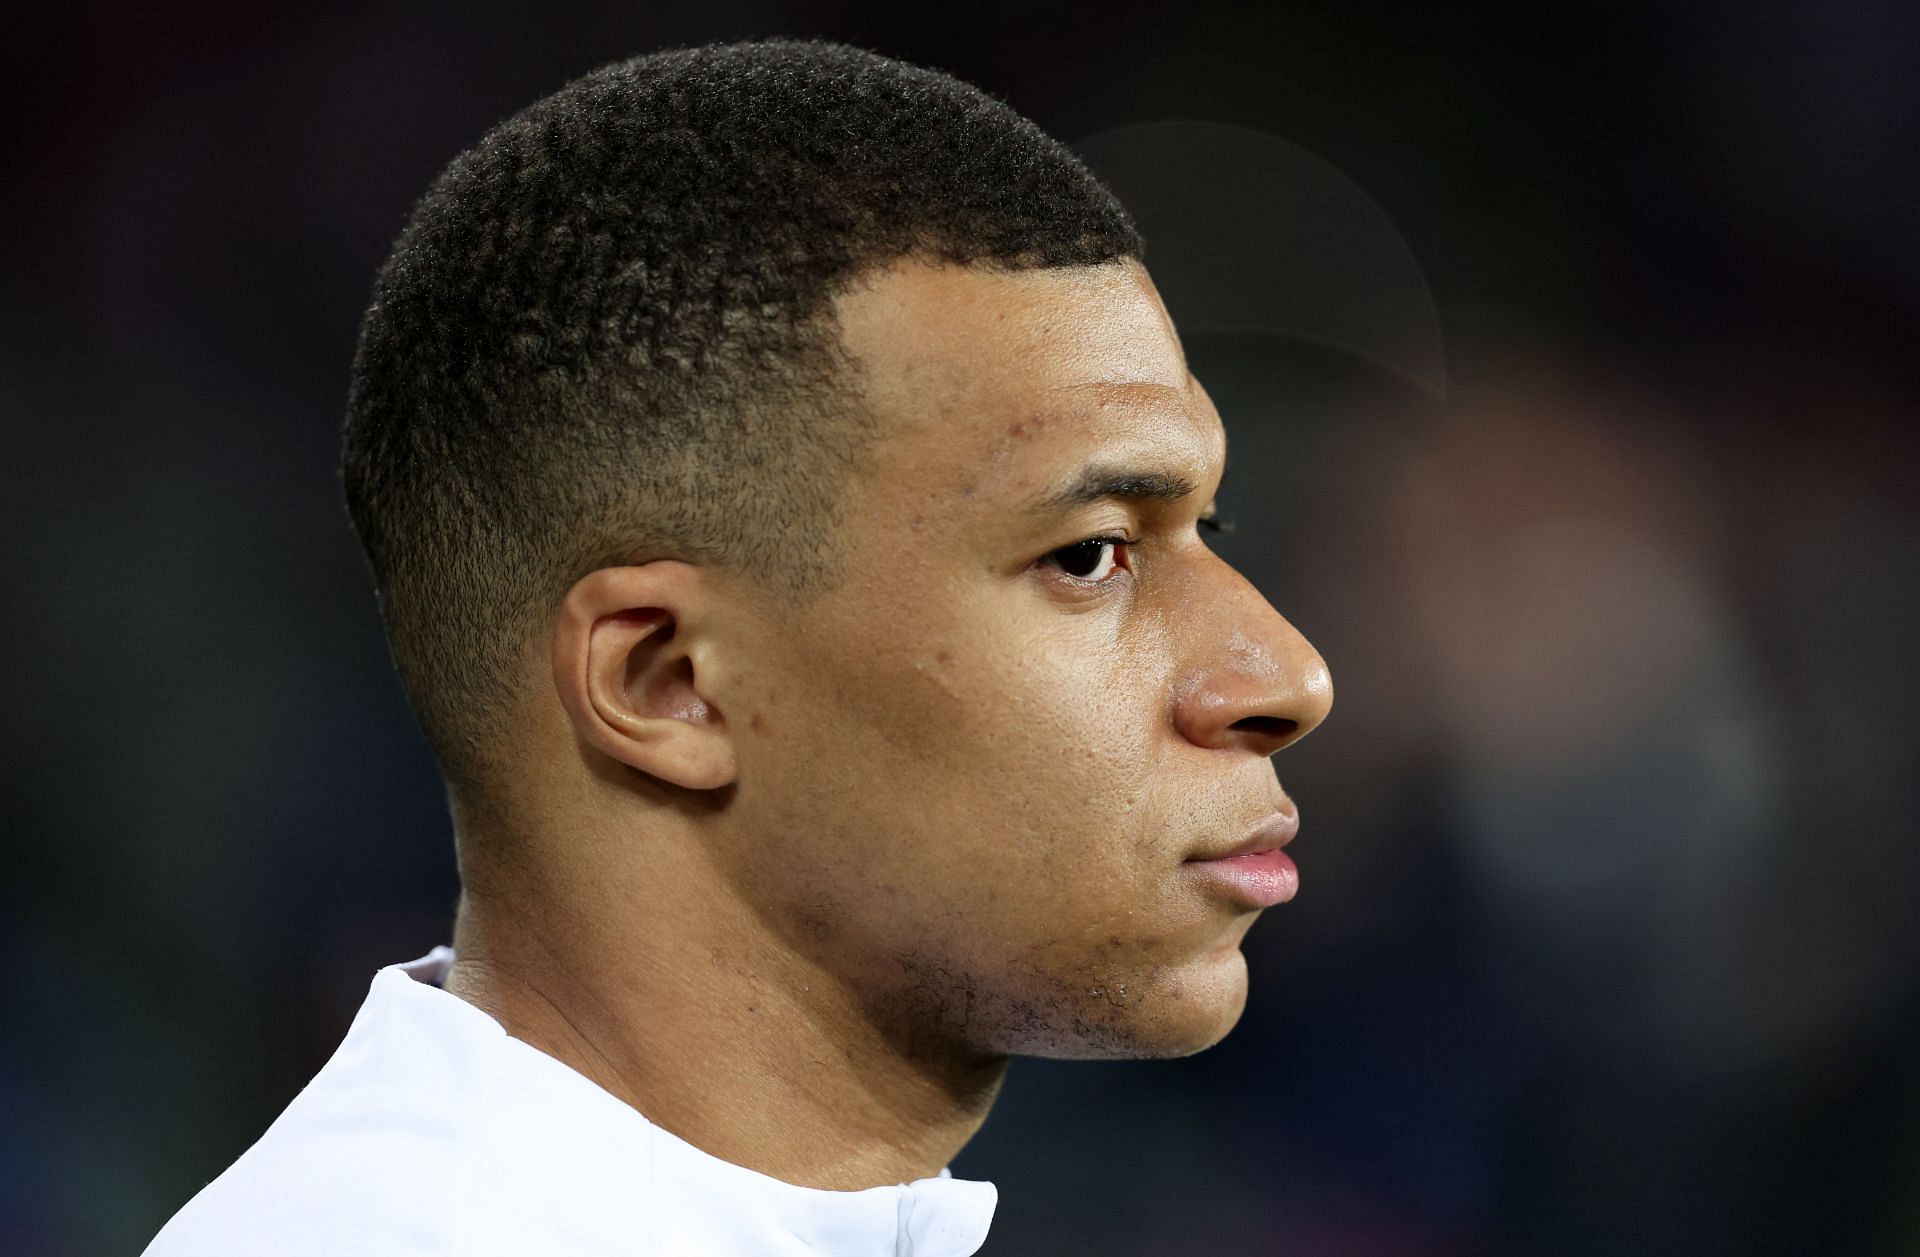 Kylian Mbappe is edging closer to a move to the Santiago Bernabeu